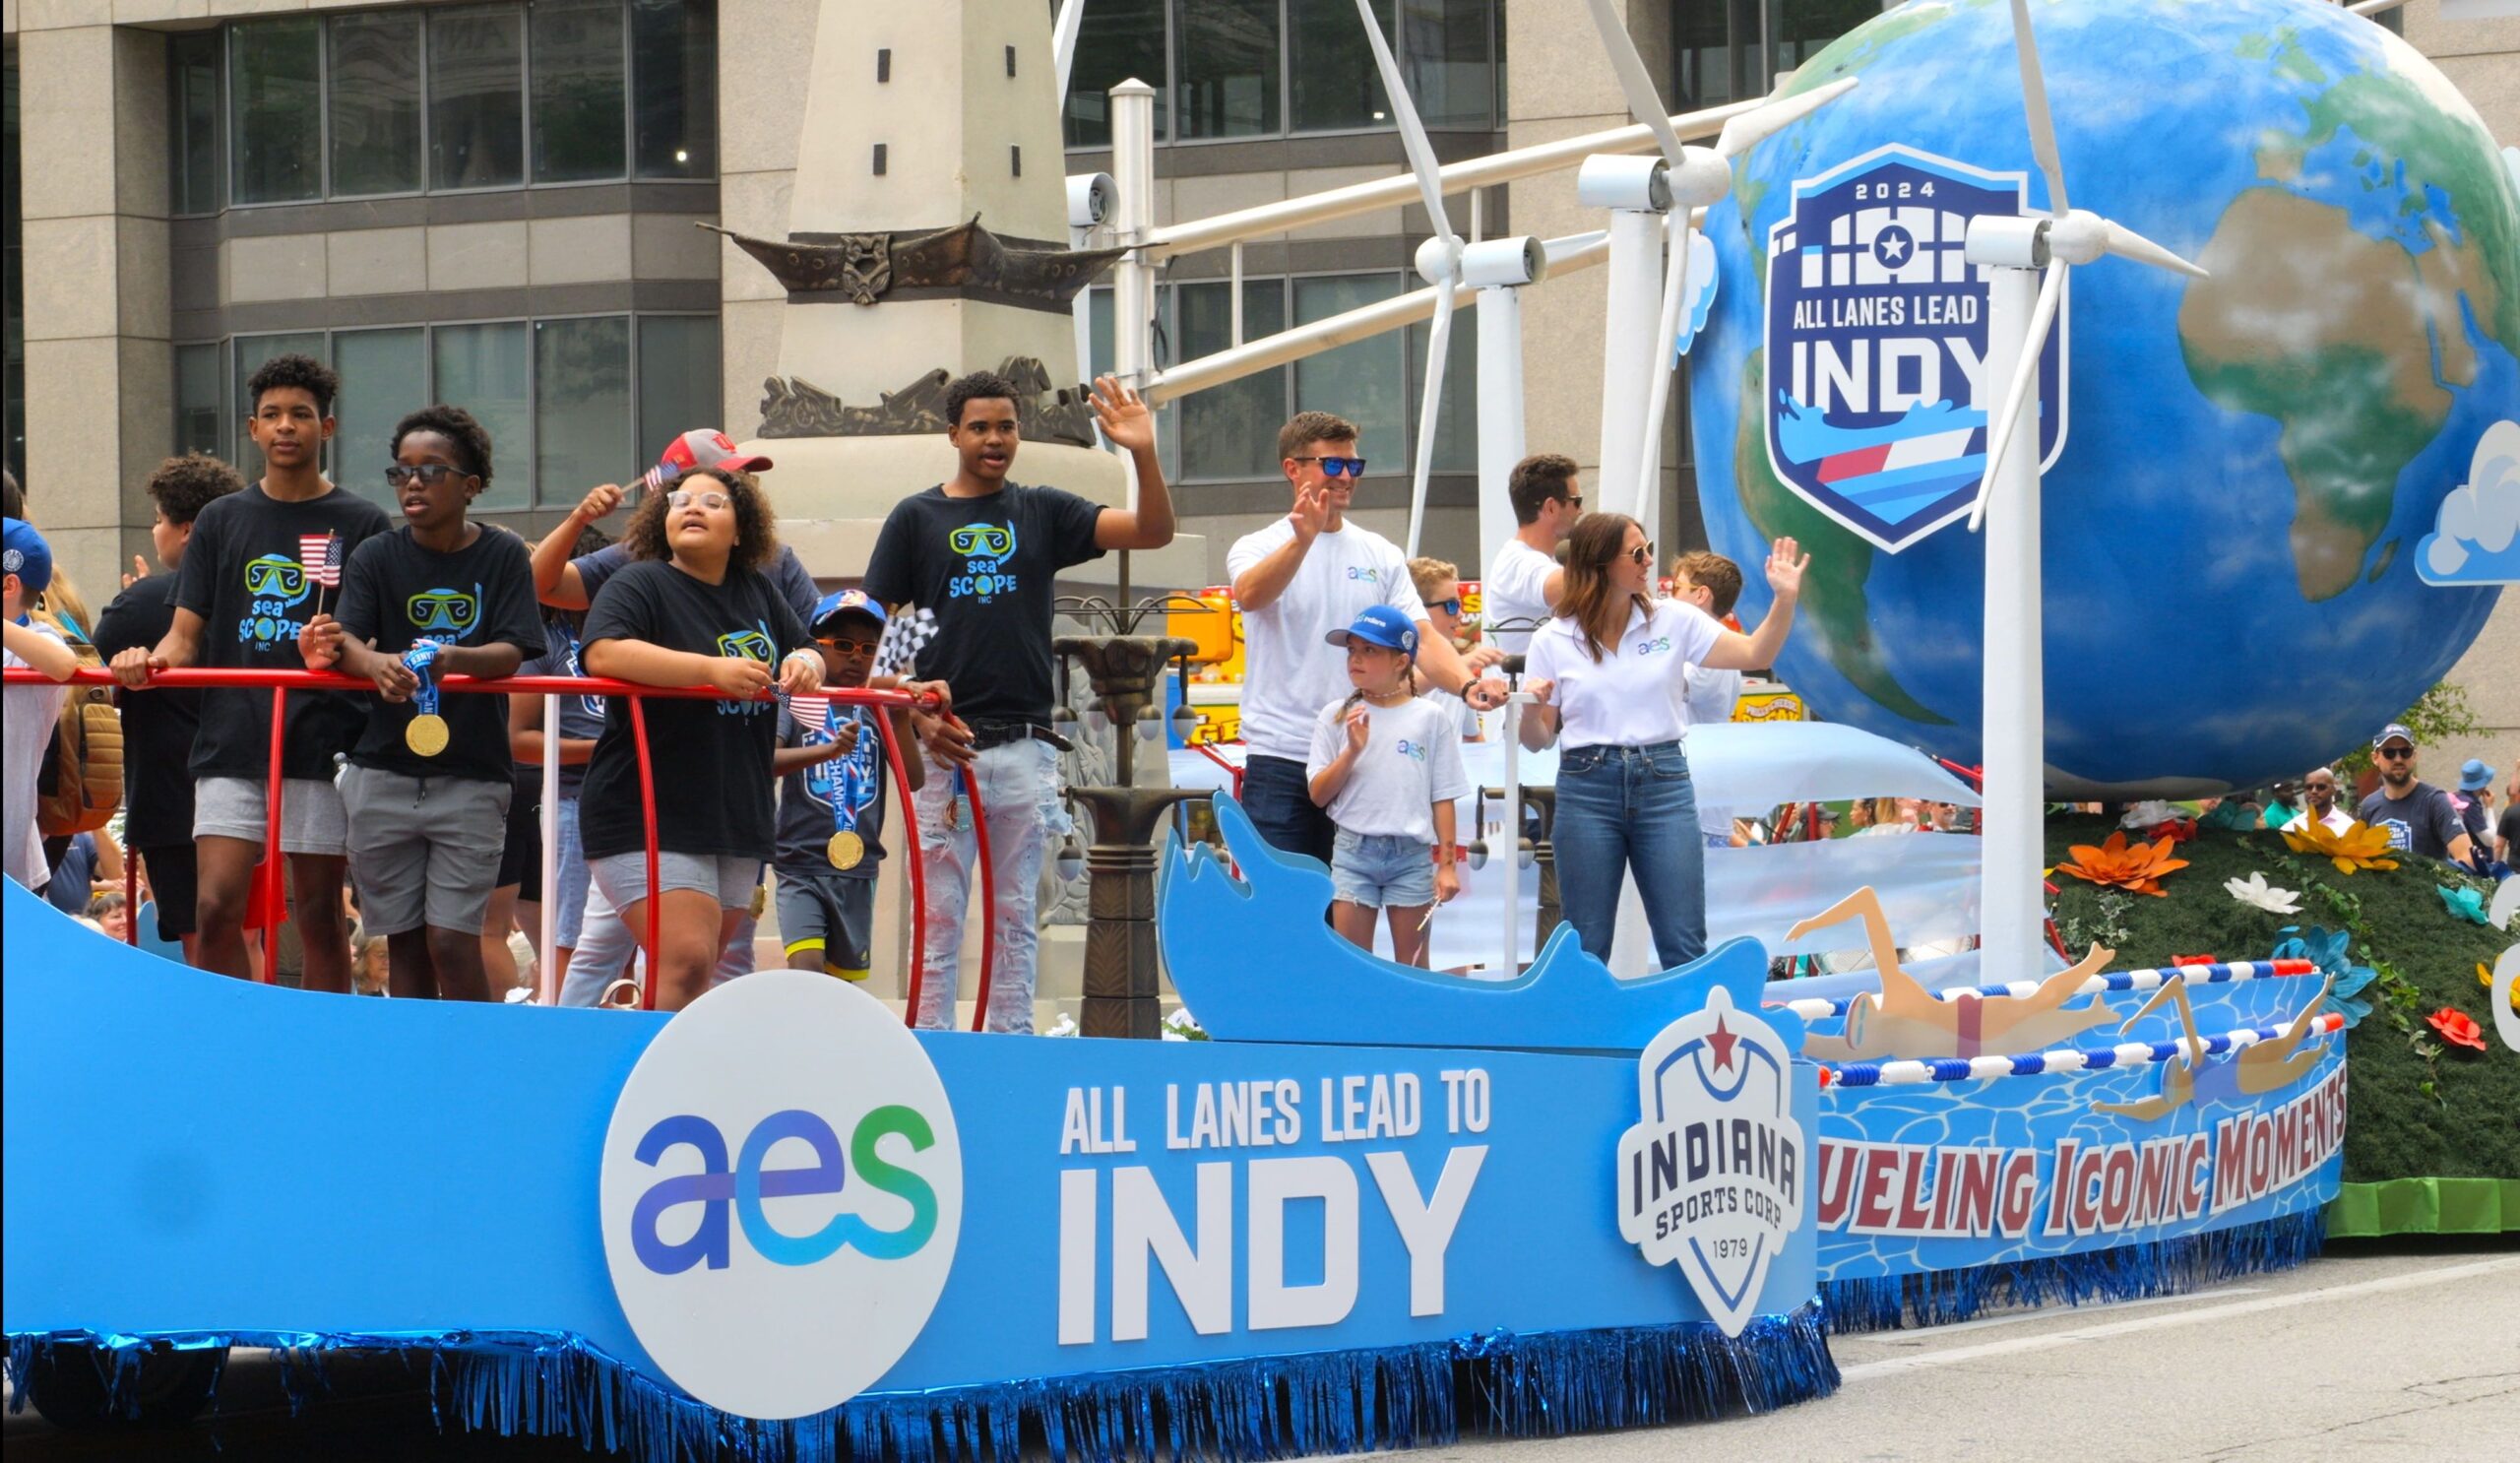 All Lanes Lead to Indy Float during the 500 Festival